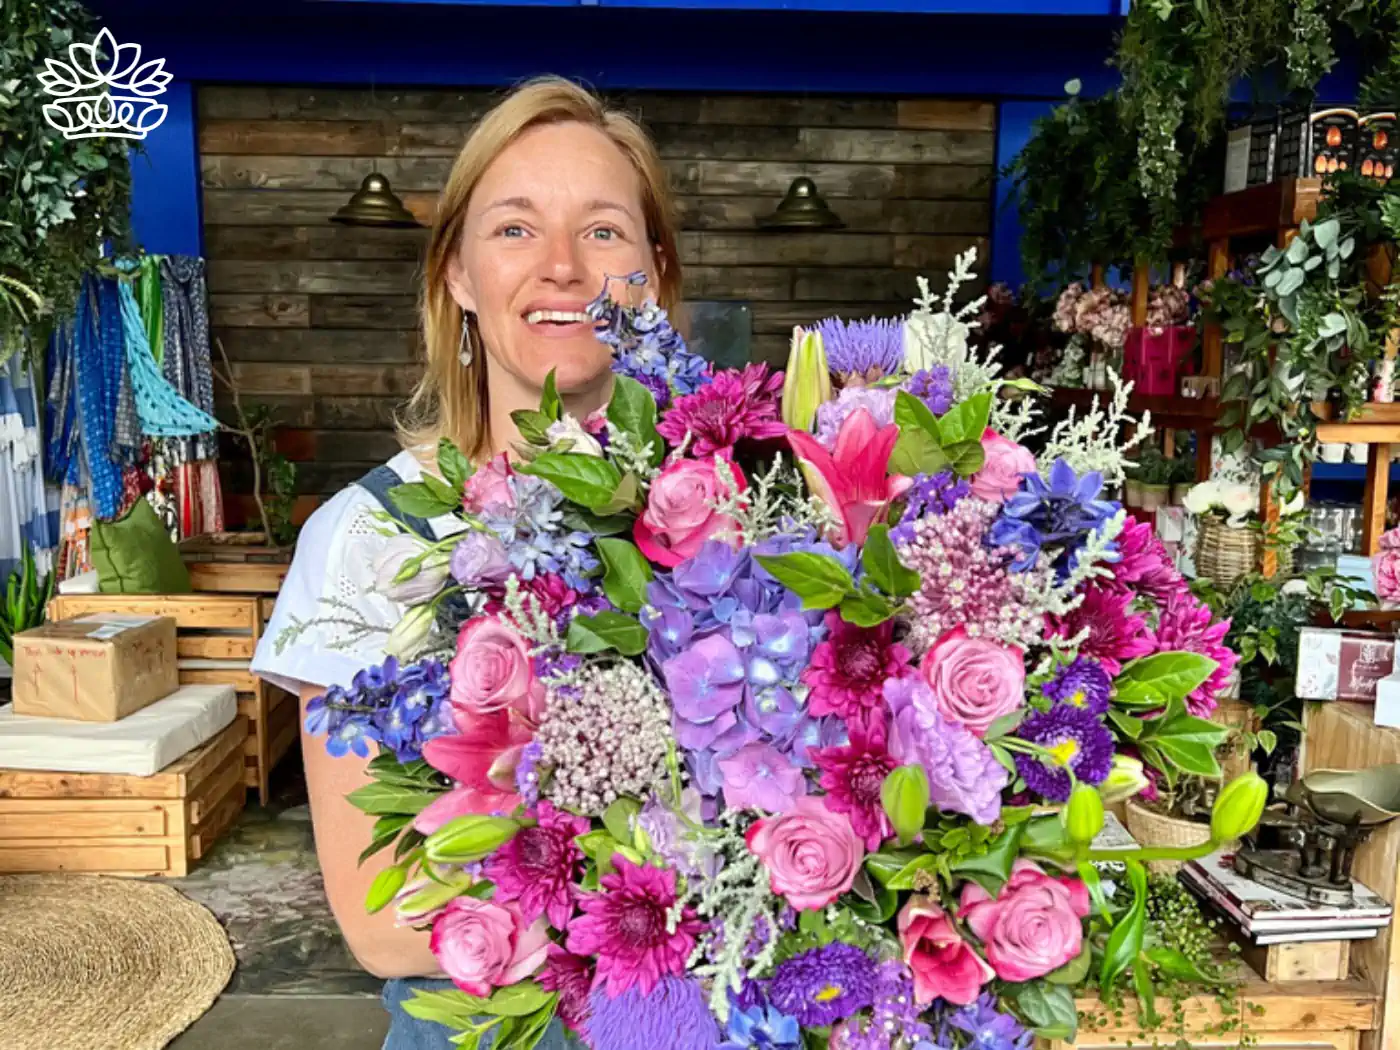 Cheerful woman holding a luxurious blue and pink floral arrangement inside a flower shop, from the Fabulous Flowers and Gifts collection.